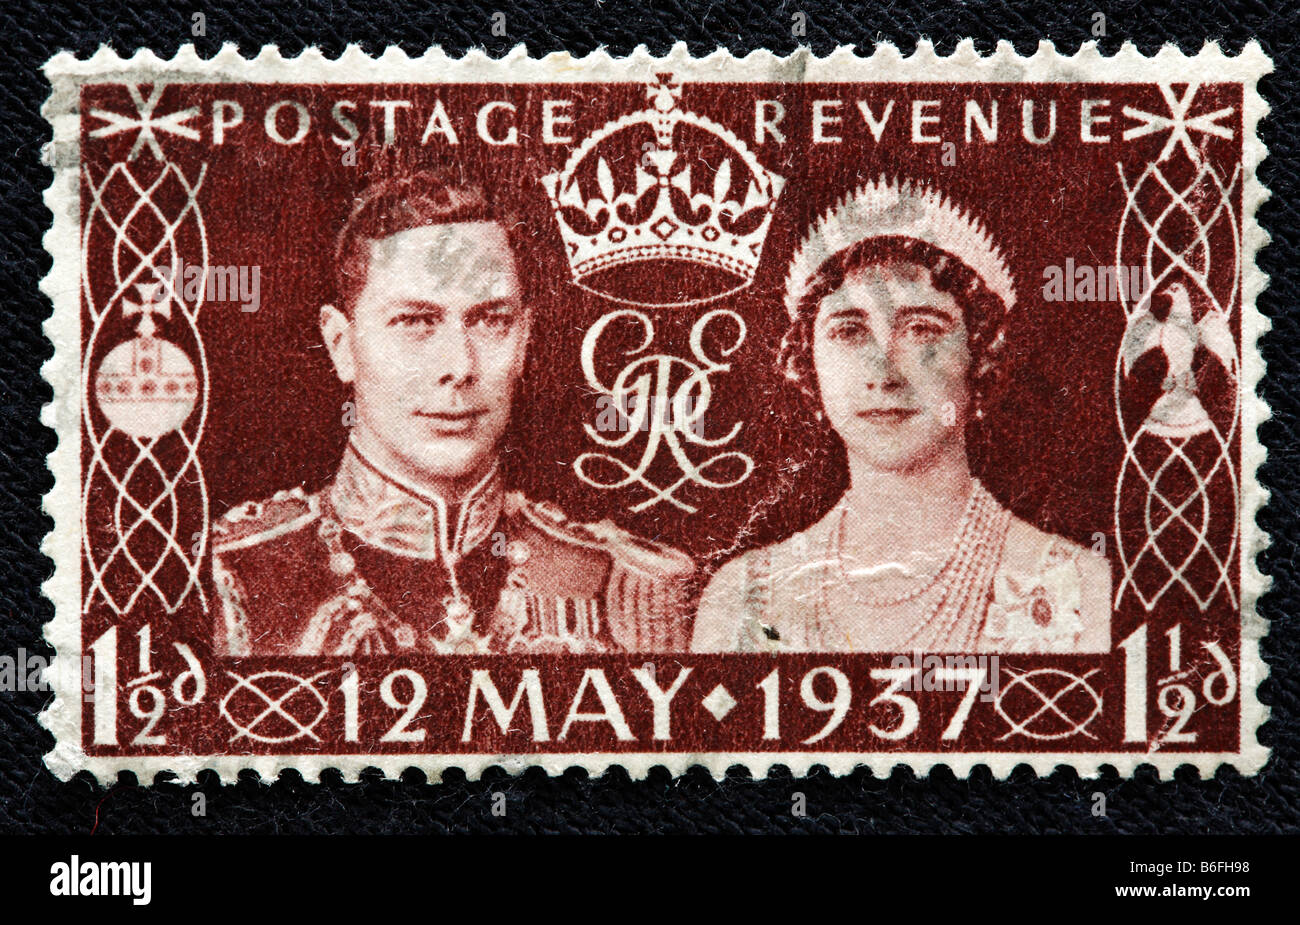 Wedding of King George VI of the UK (1936-1952) and Elizabeth Bowes Lyon (Queen Mother), 12 May 1937, postage stamp, UK Stock Photo